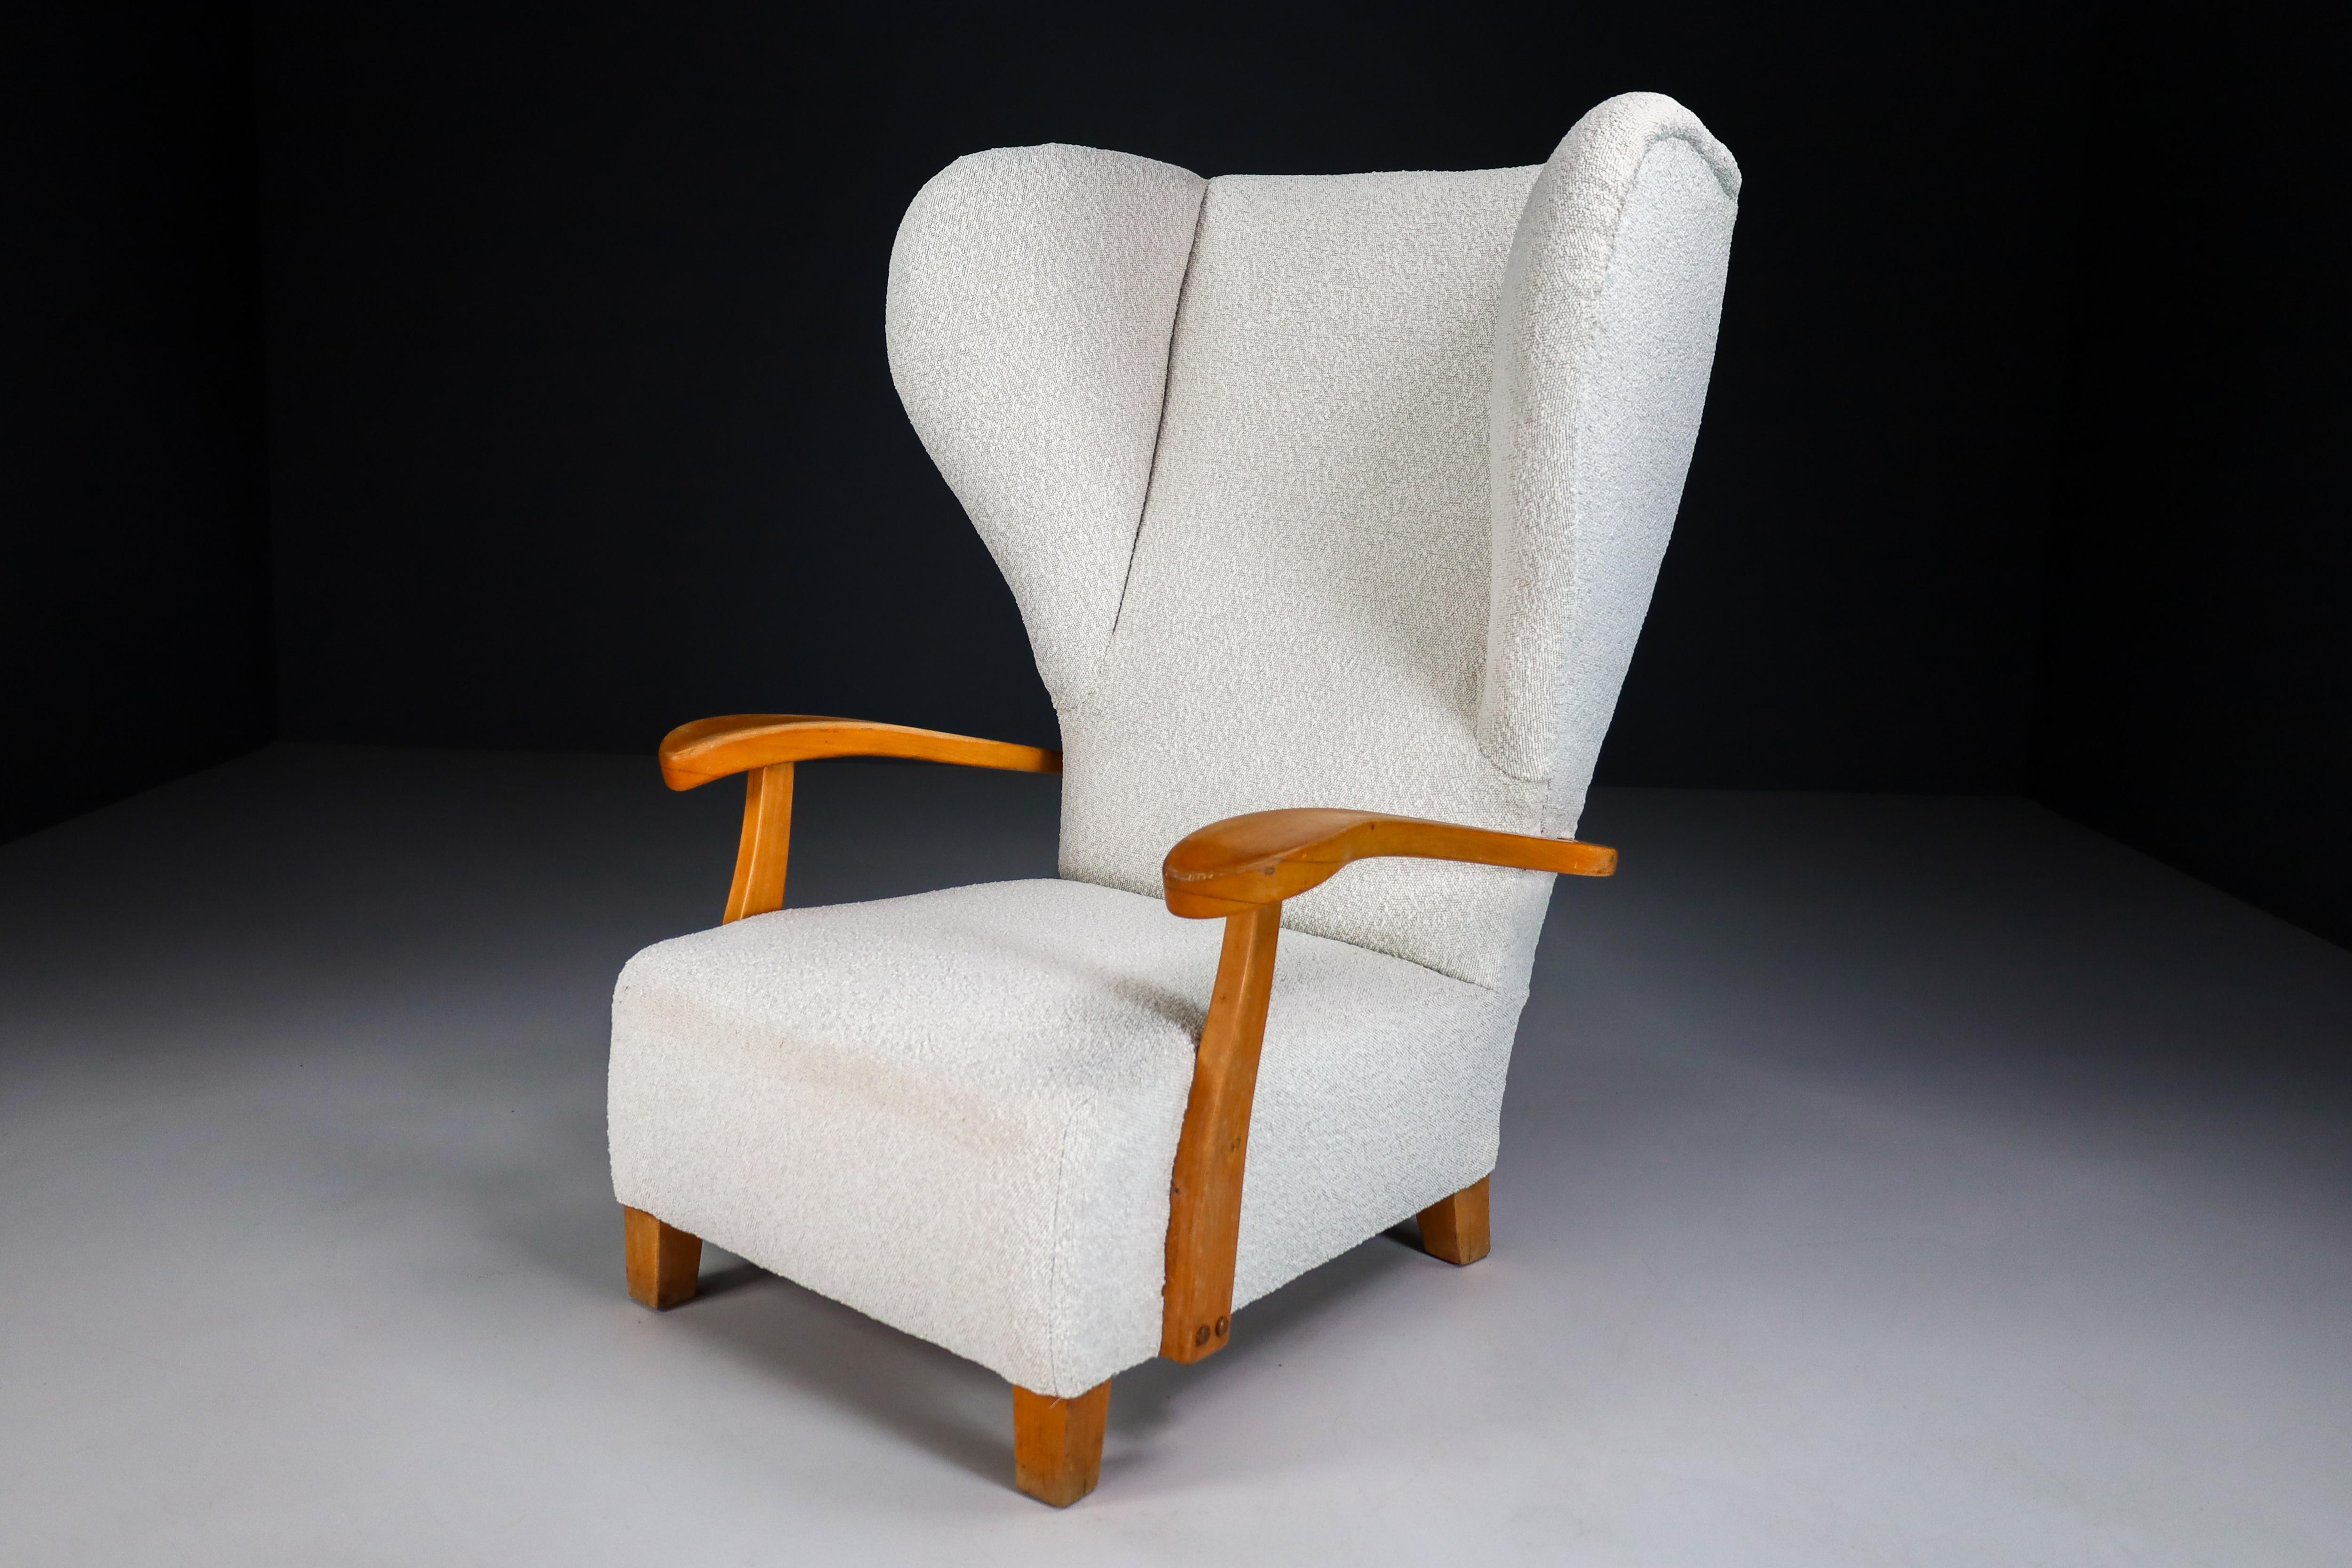 XXL Monumental Wingback Armchair in Walnut and Bouclé Fabric, France 1930s For Sale 7